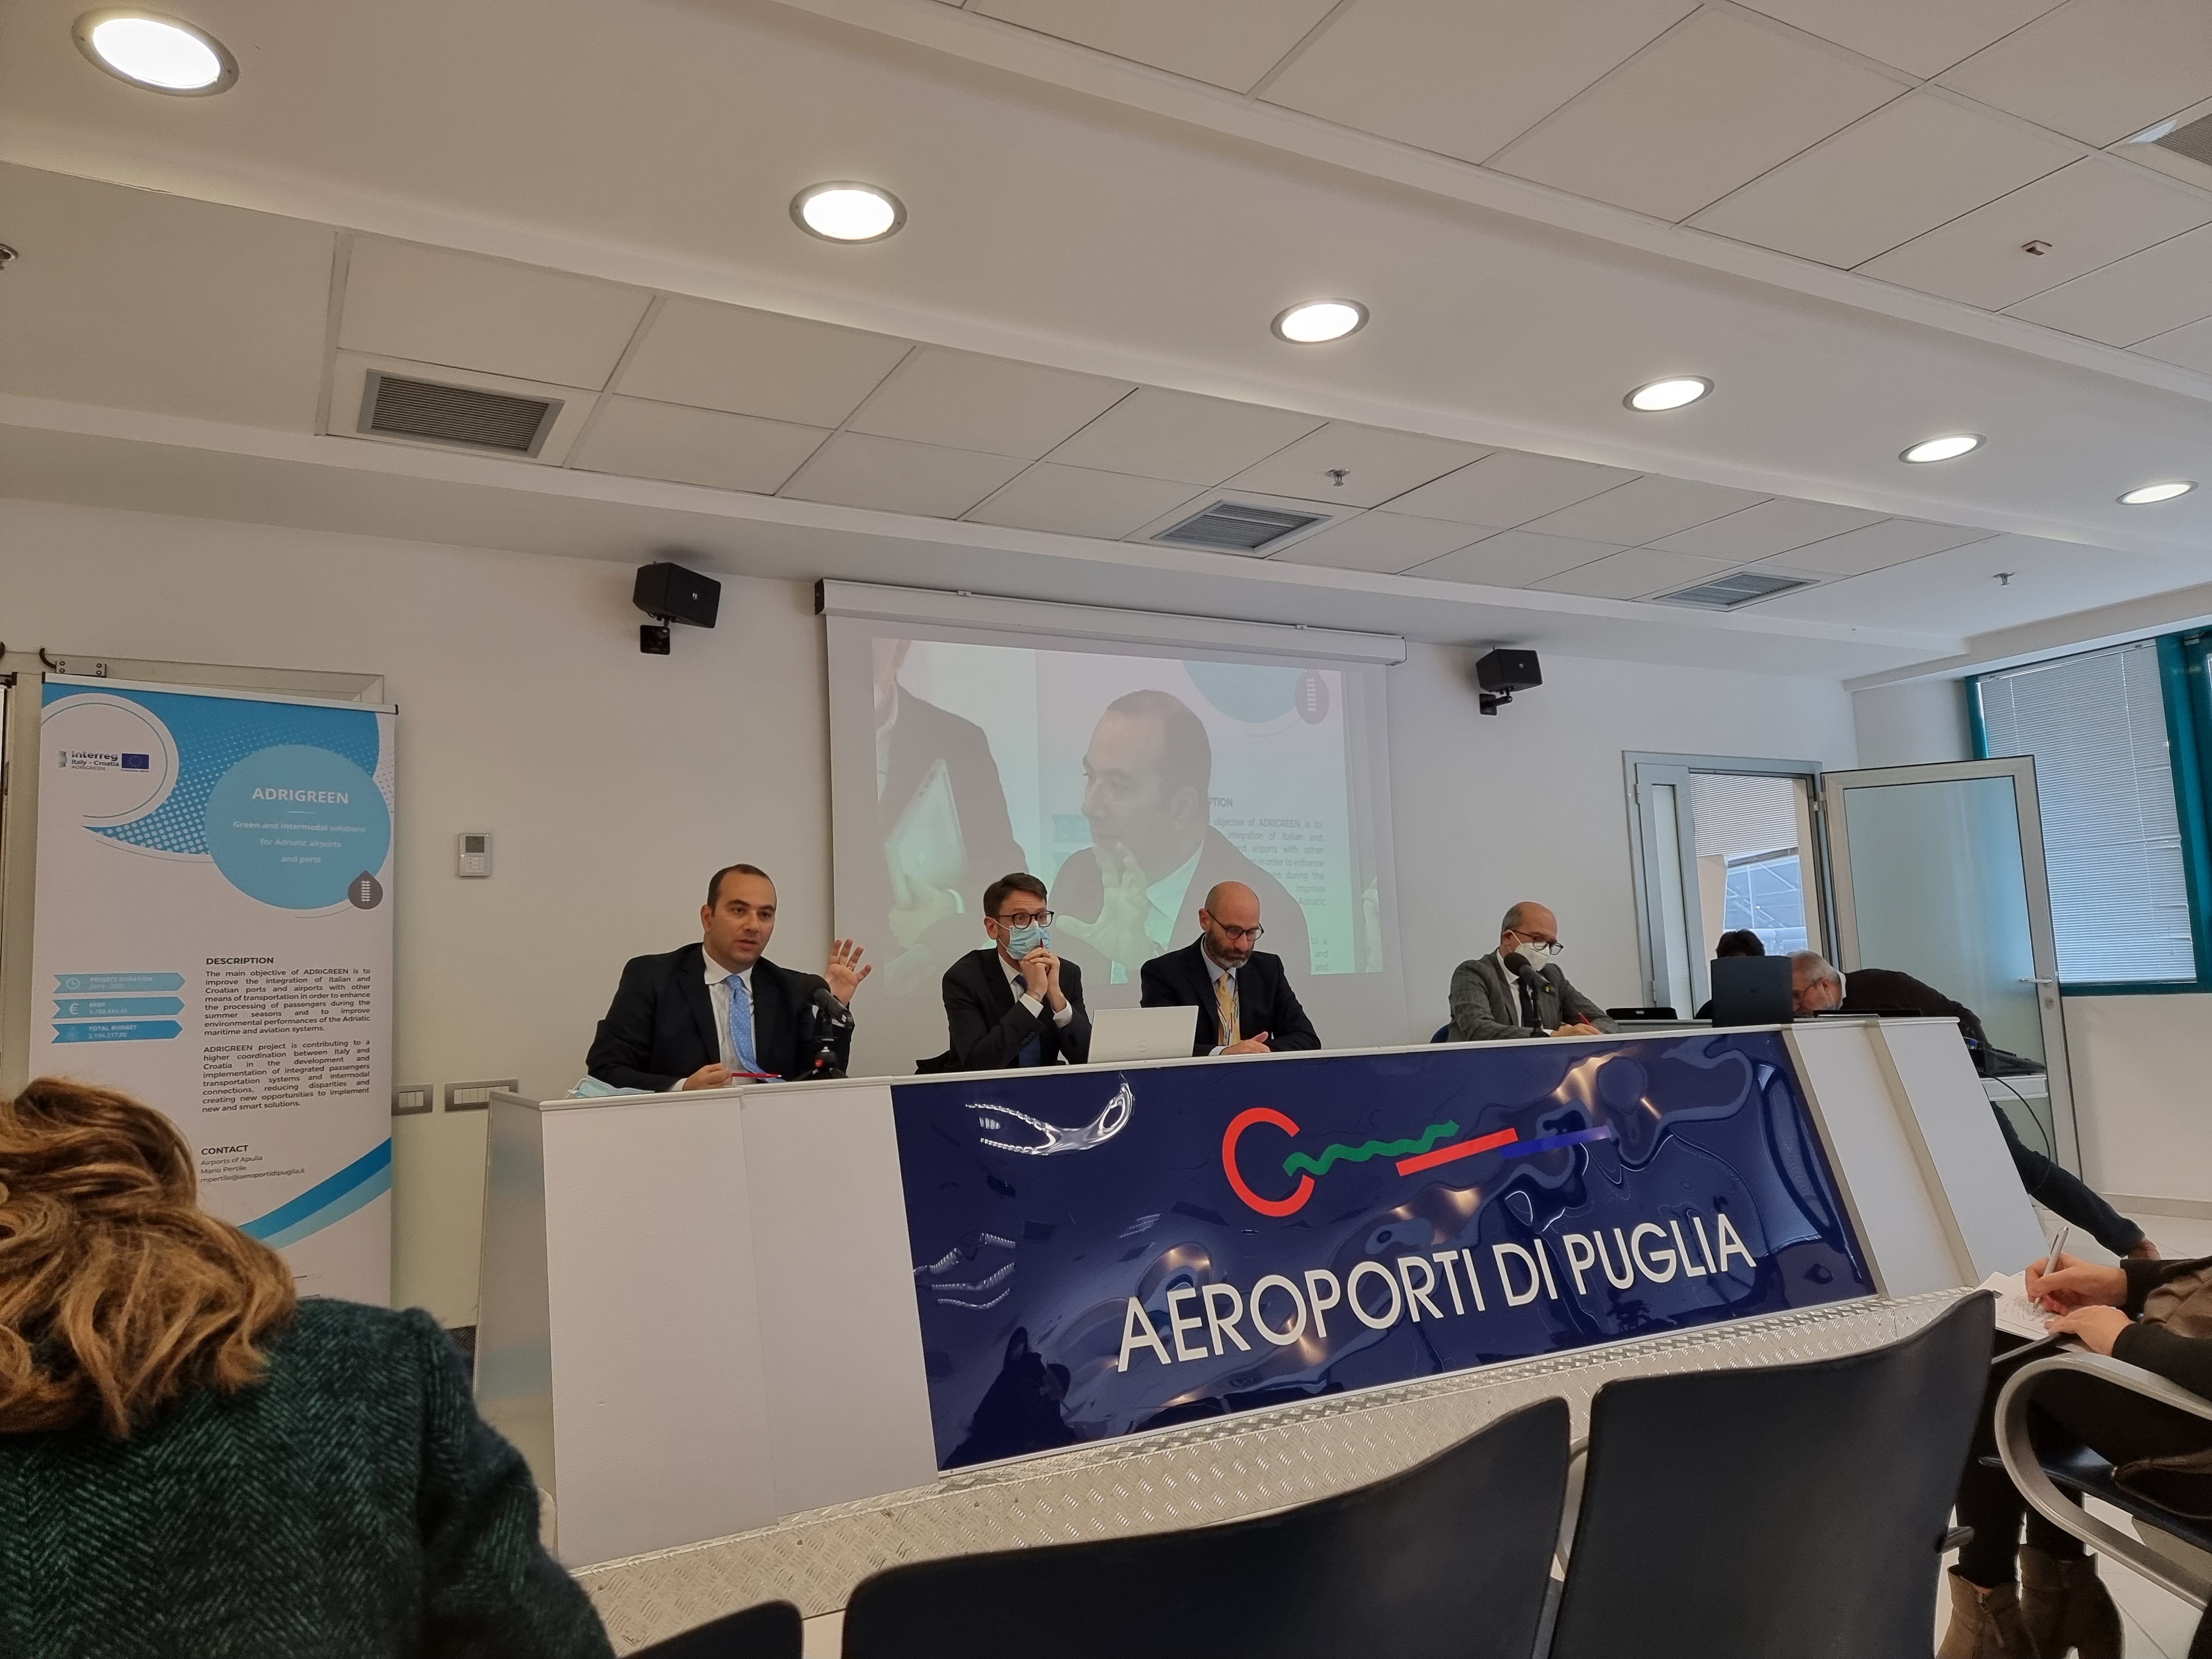 ADRIGREEN Project results presented in Bari